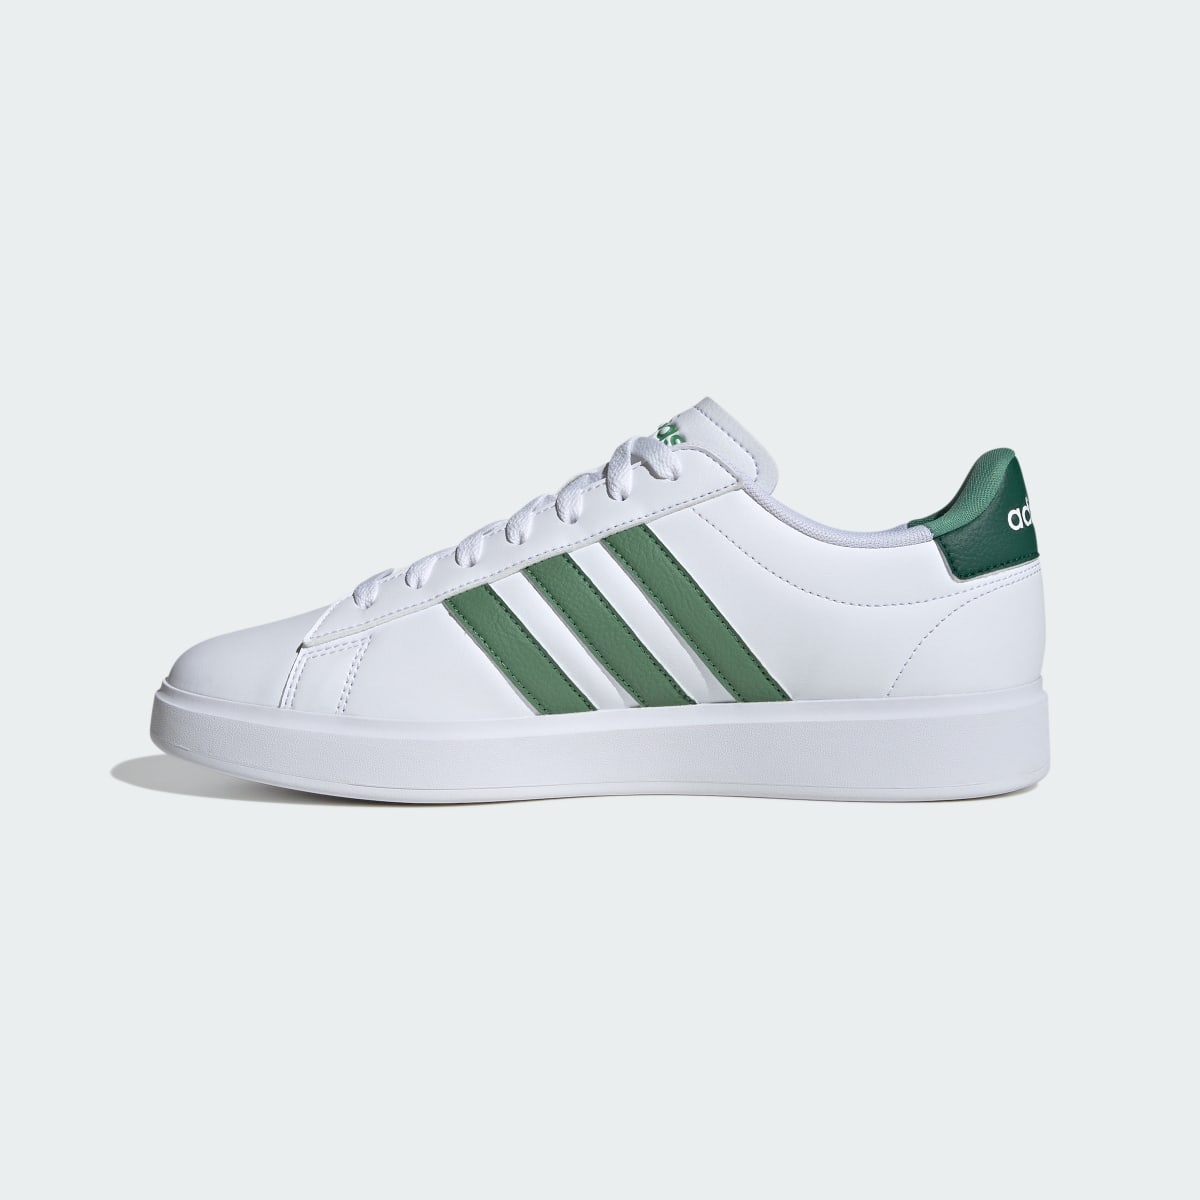 Adidas Grand Court 2.0 Shoes. 5